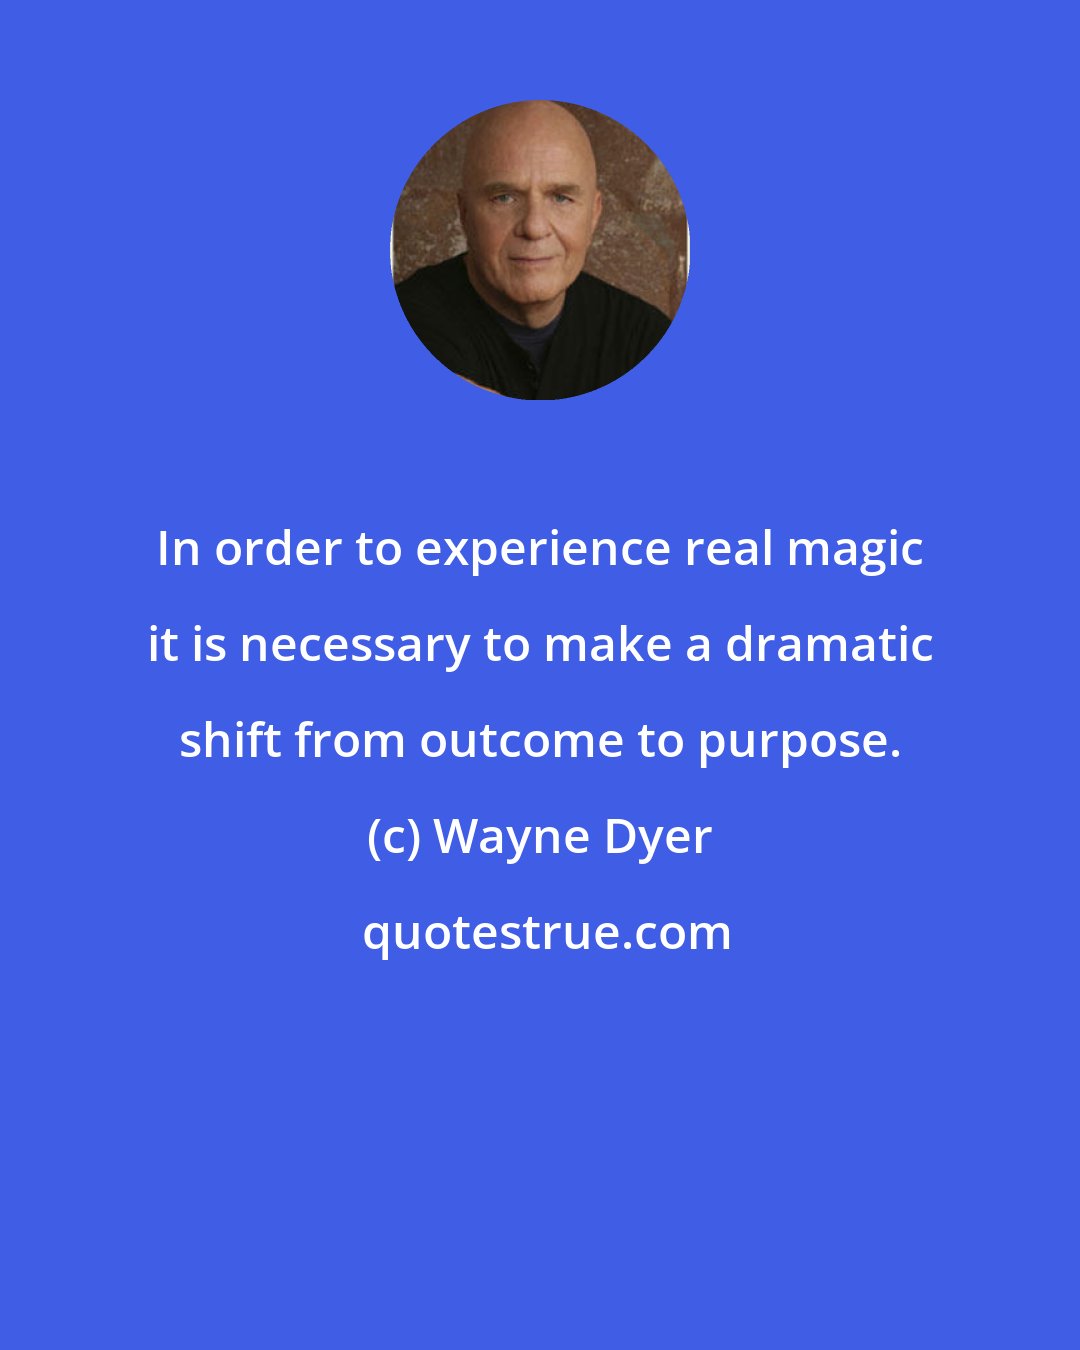 Wayne Dyer: In order to experience real magic it is necessary to make a dramatic shift from outcome to purpose.